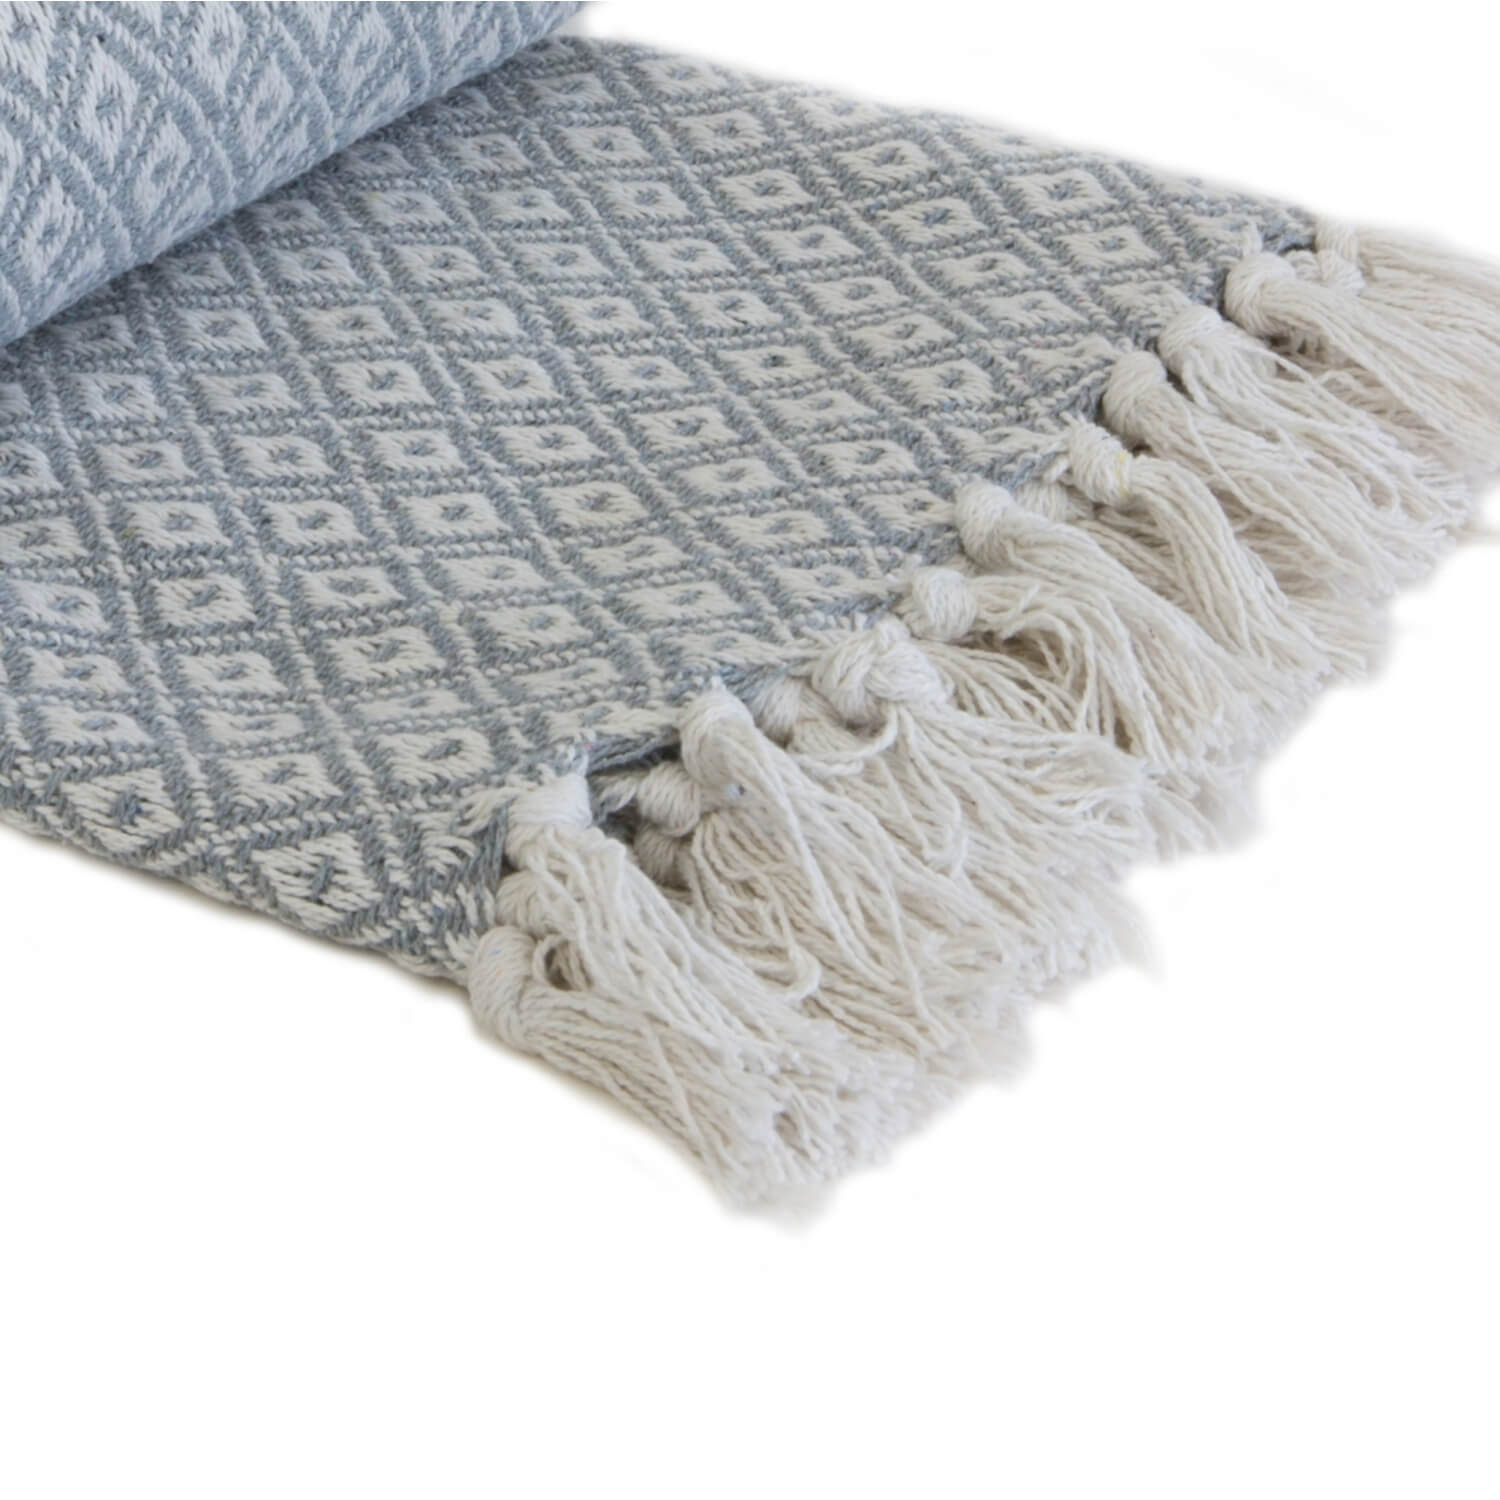 The Home Living Room Casablanca Throw 70cm x 100cm - Silver 2 Shaws Department Stores